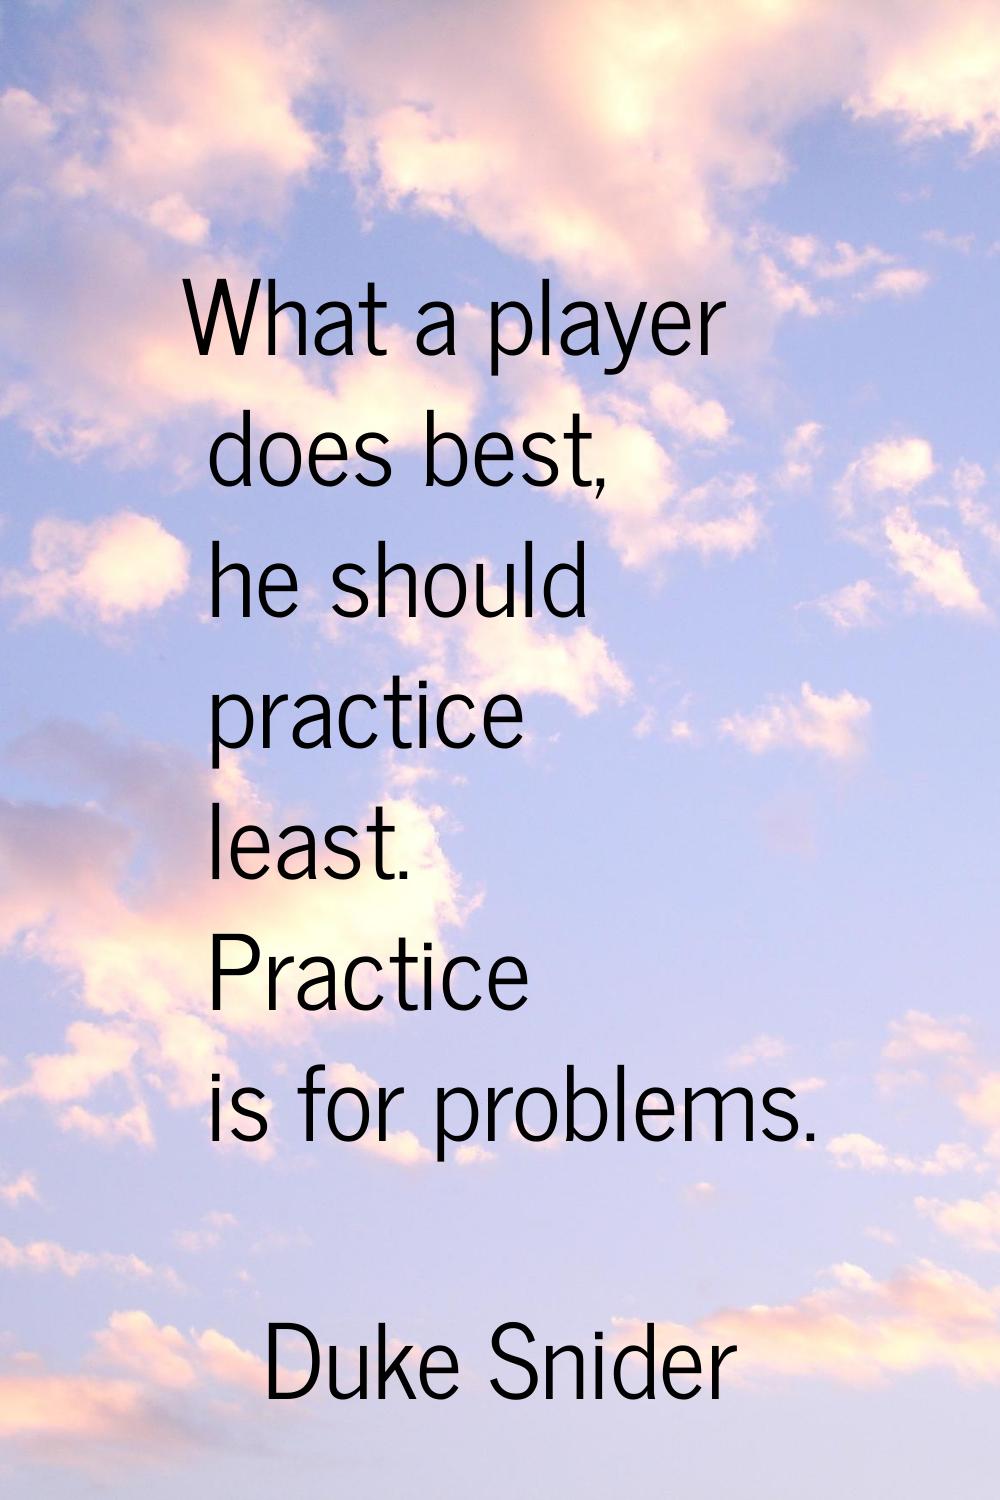 What a player does best, he should practice least. Practice is for problems.